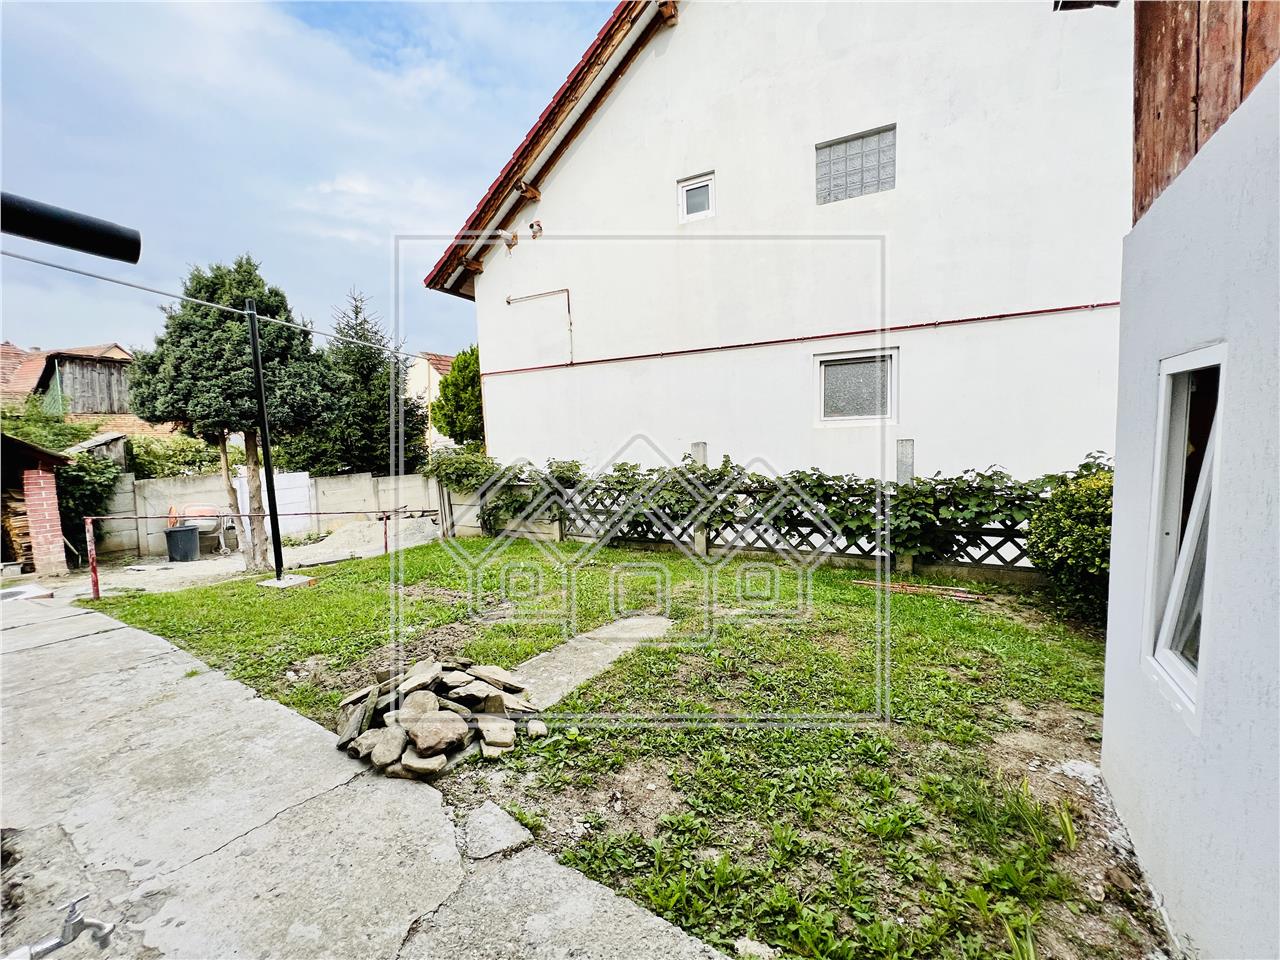 House for sale in Sibiu - Cisnadie - 1300 sqm land - fully renovated i